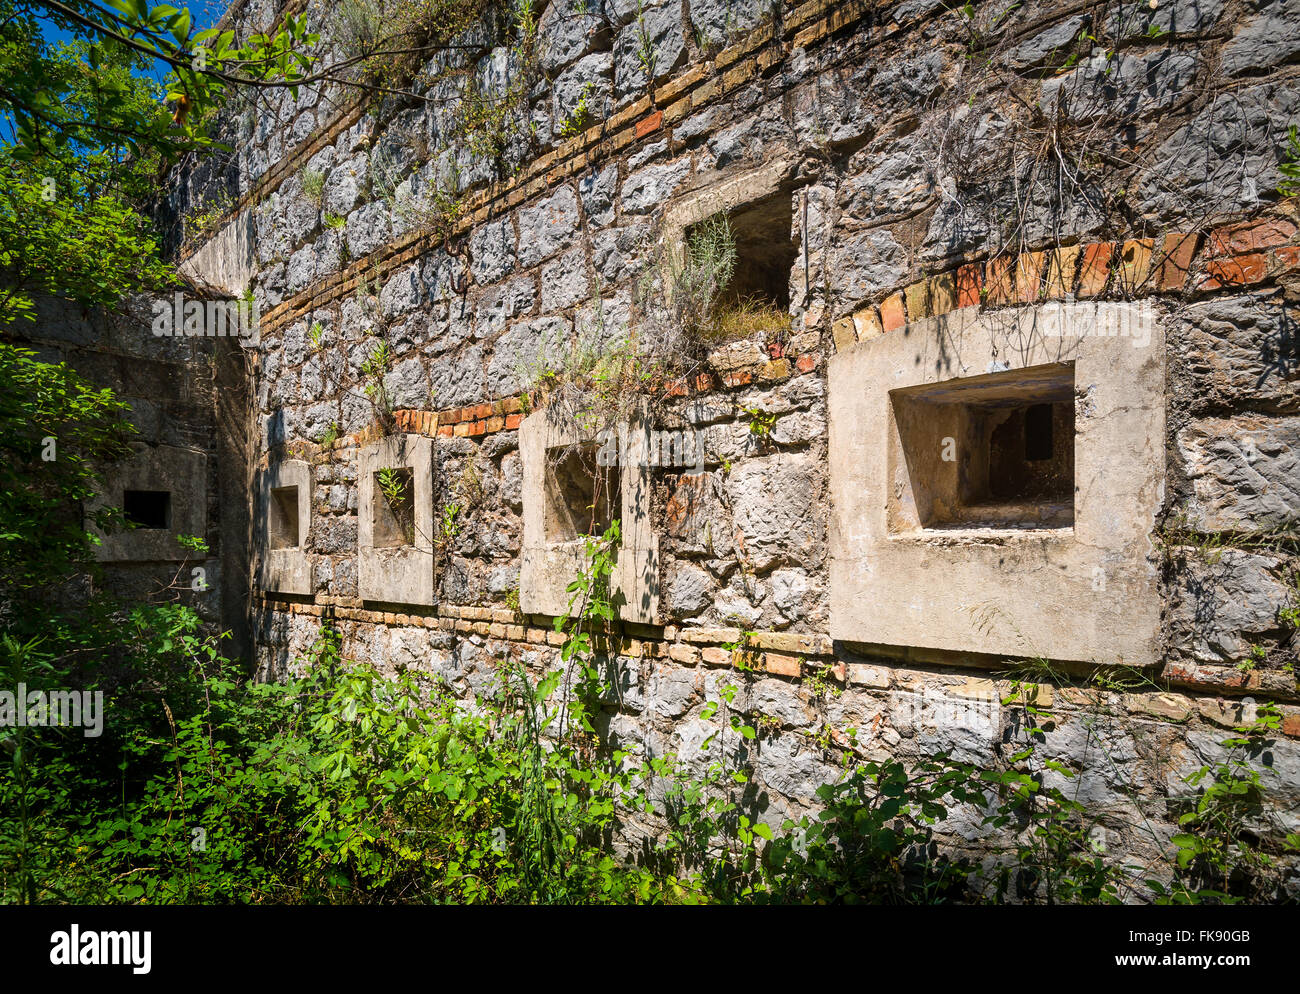 Ancient fortification wall with windows Stock Photo